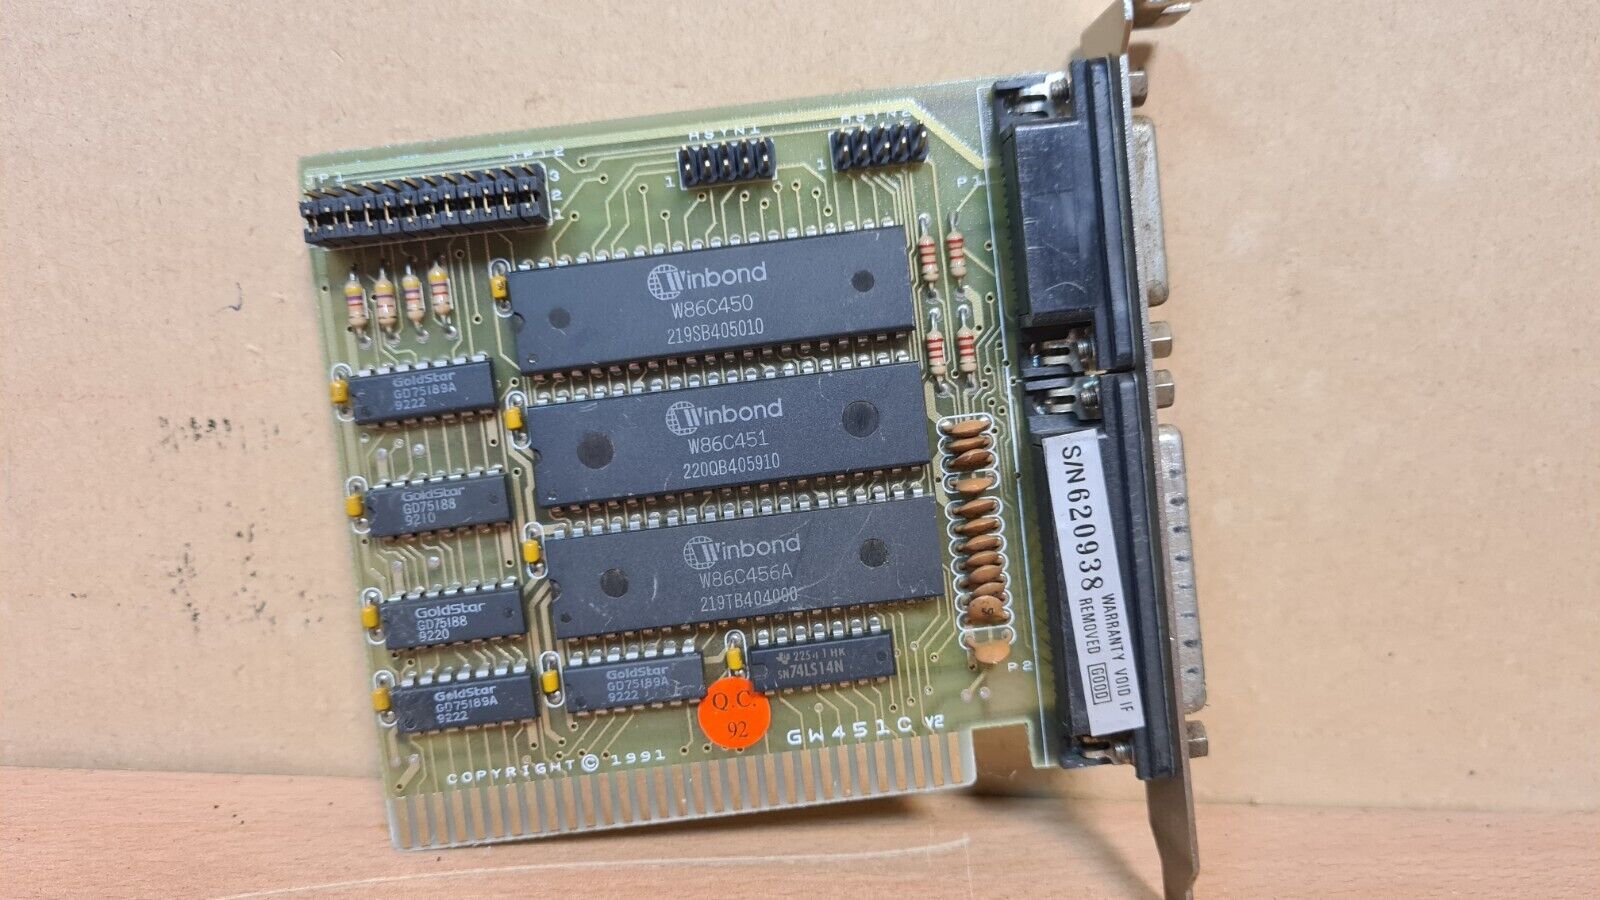 GW4510 Winbond W86C450 W86C451 W86C456A ISA Controller Card from old Computer